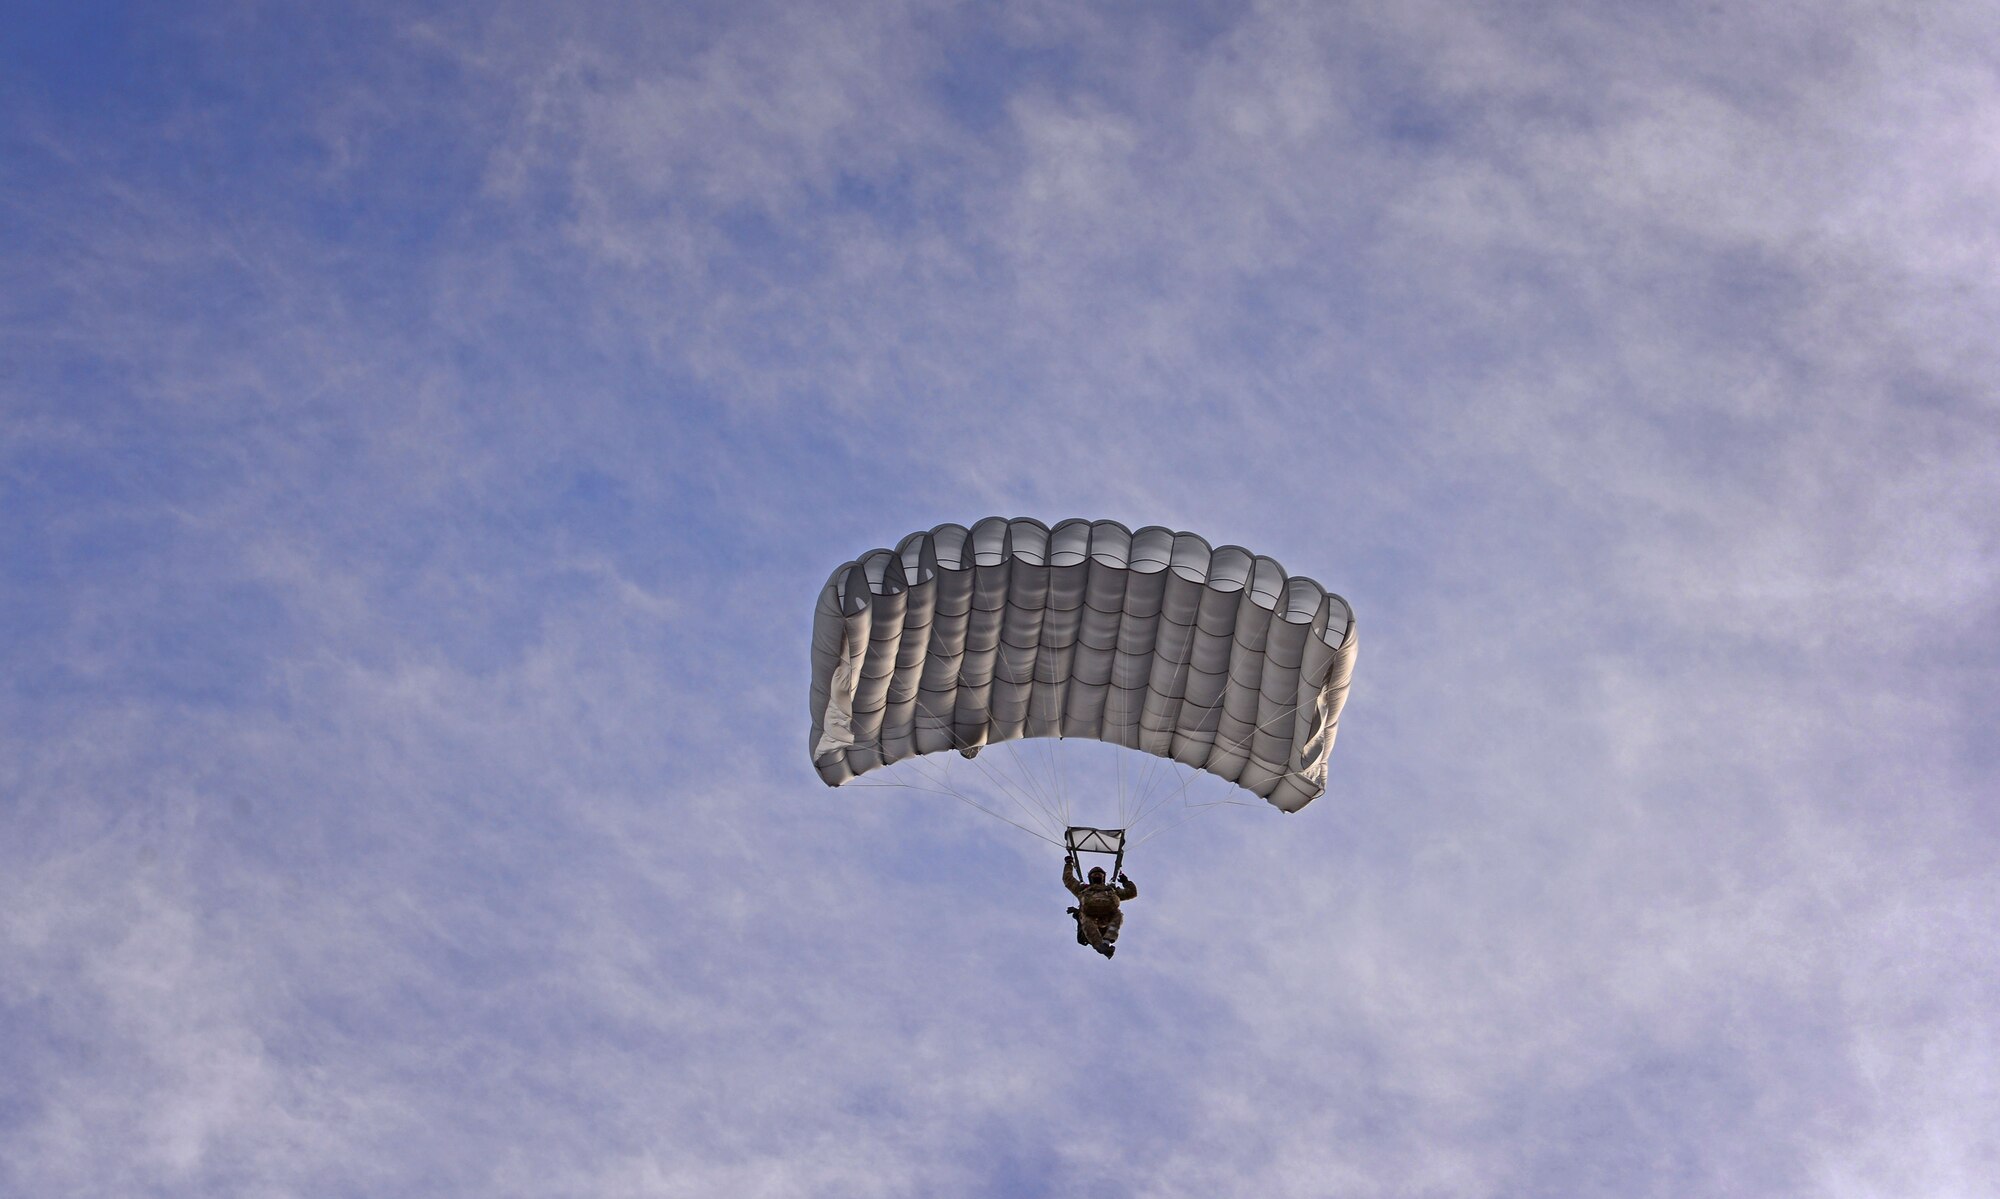 A member of the 26th Special Tactics Squadron parachutes down over the flightline March 25, 2016, at Cannon Air Force Base, N.M. Air Commandos with the 26th STS performed routine practice jumps as part of maintaining operational readiness. (U.S. Air Force photo/Staff Sgt. Alexx Pons) 